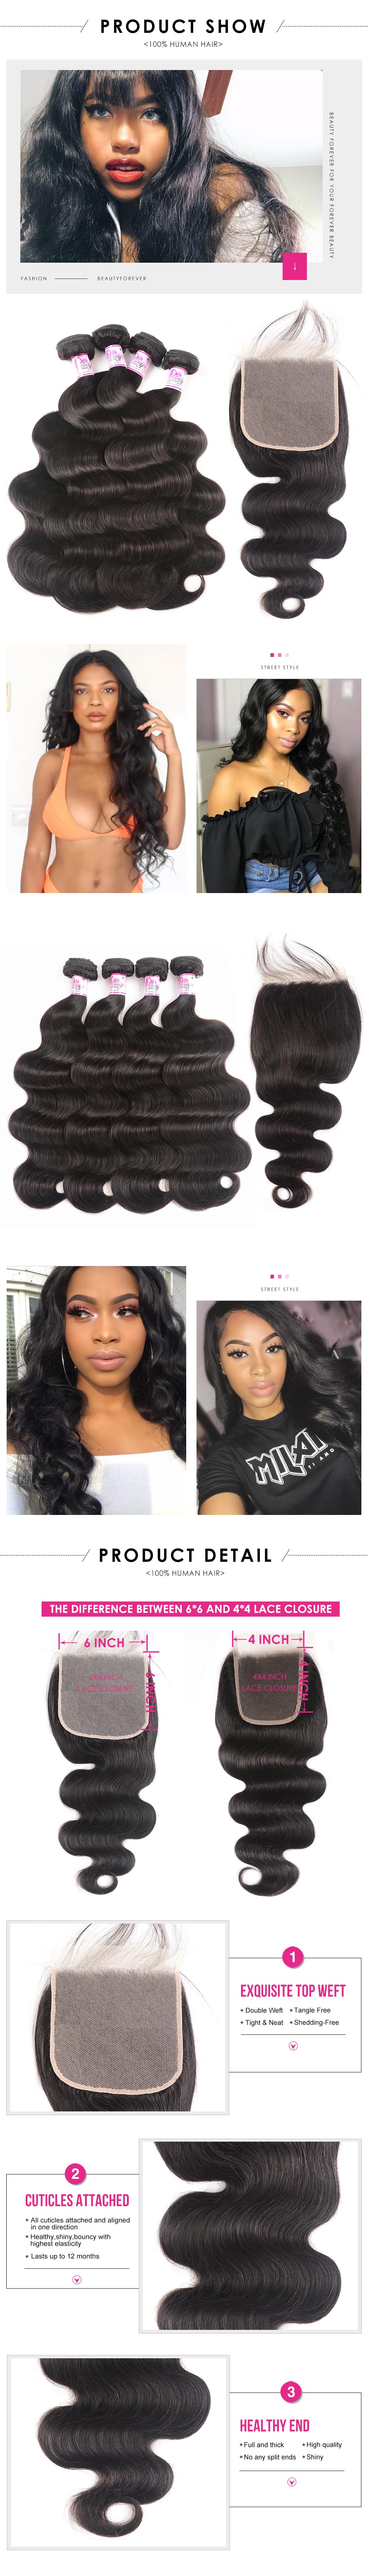 Body 4bundle with 6x6 Lace Closure